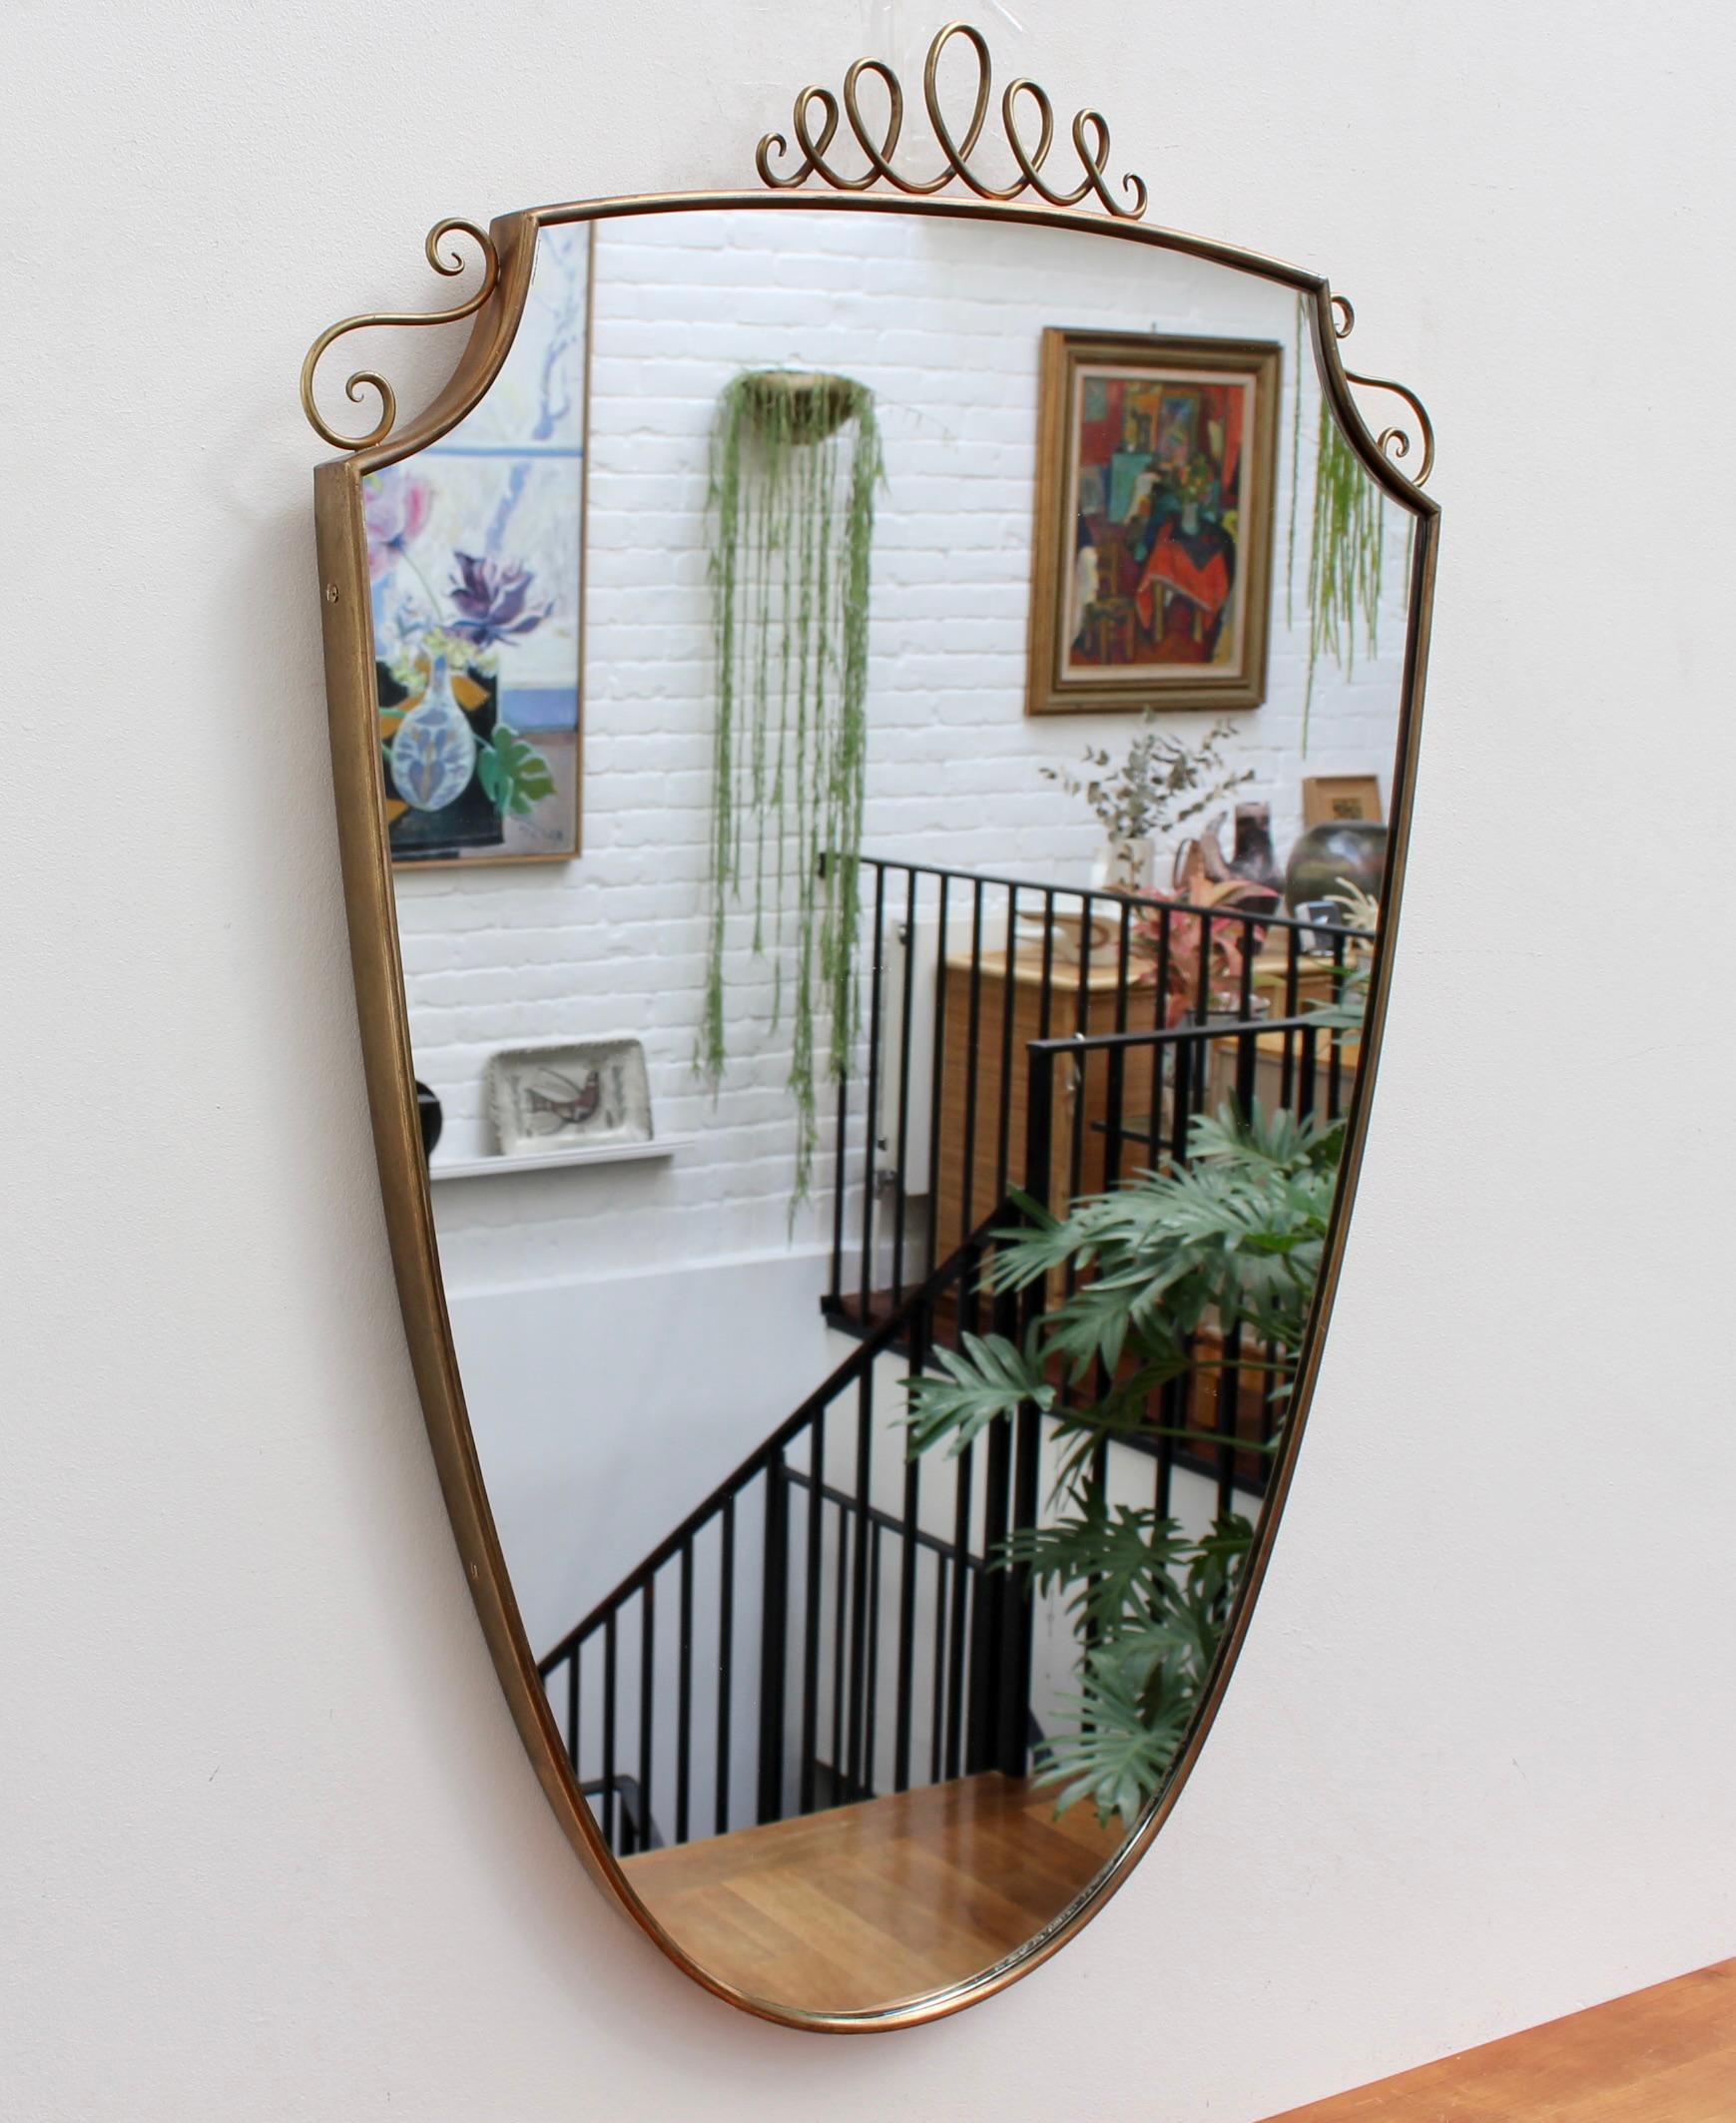 Mid-Century Italian wall mirror with brass frame and top flourish (circa 1950s). This mirror is simply elegant and characterful in a modern, Gio Ponti style. It is classically-shaped presenting a charming top flourish in the form of a decorative